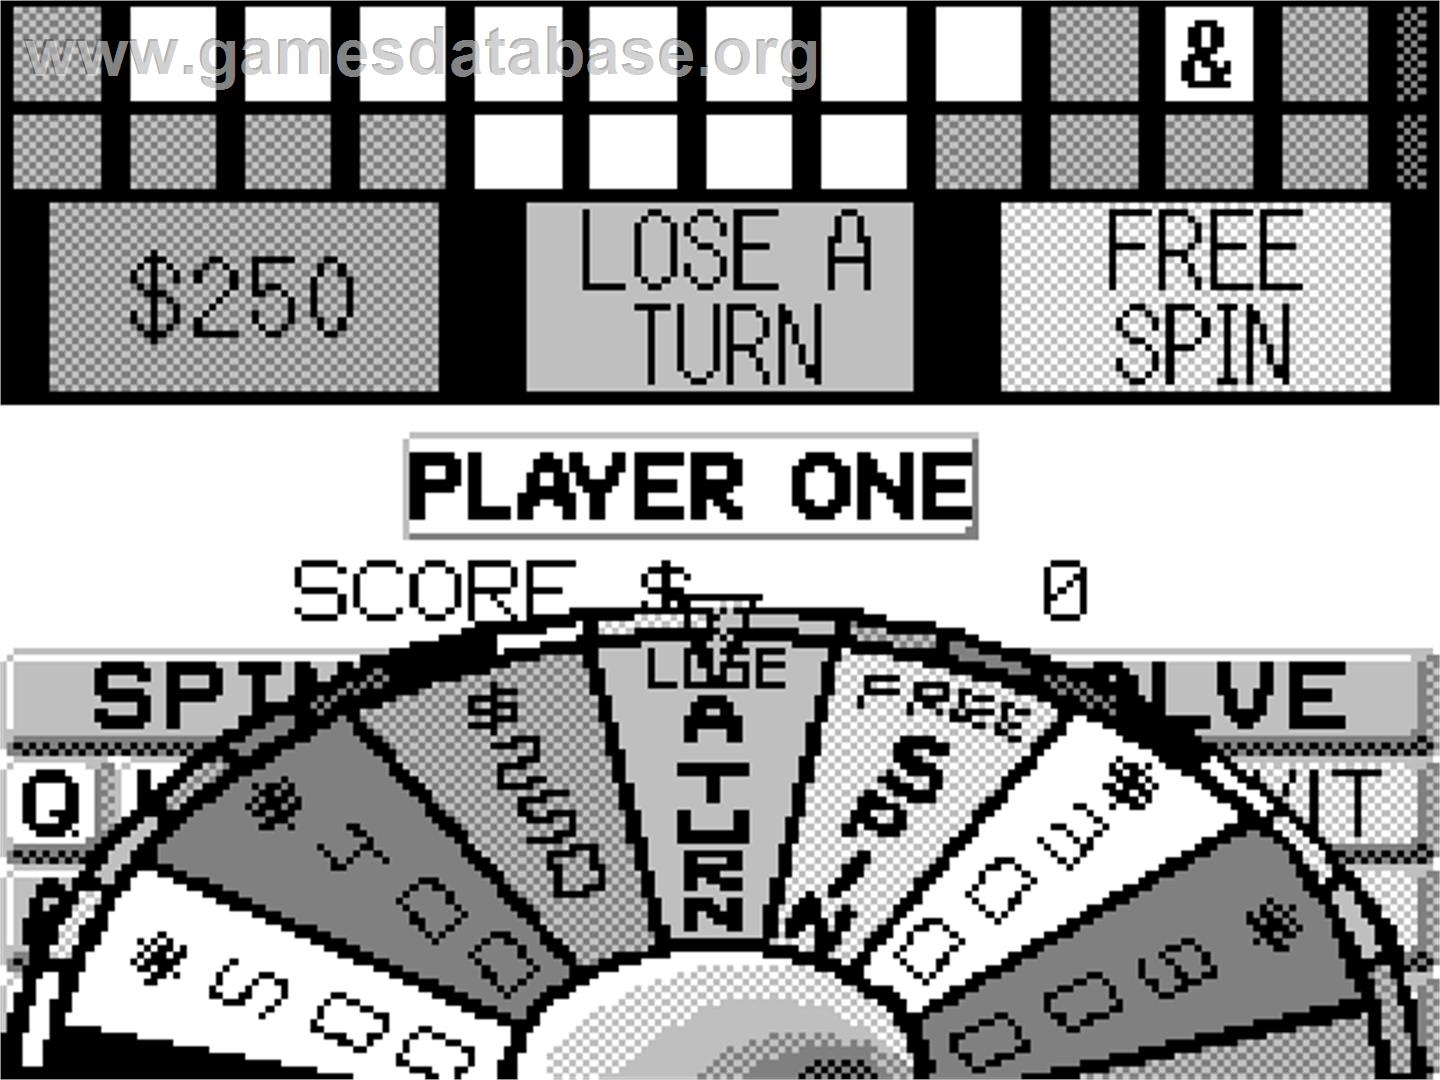 Wheel of Fortune 2 - Tiger Game.com - Artwork - In Game